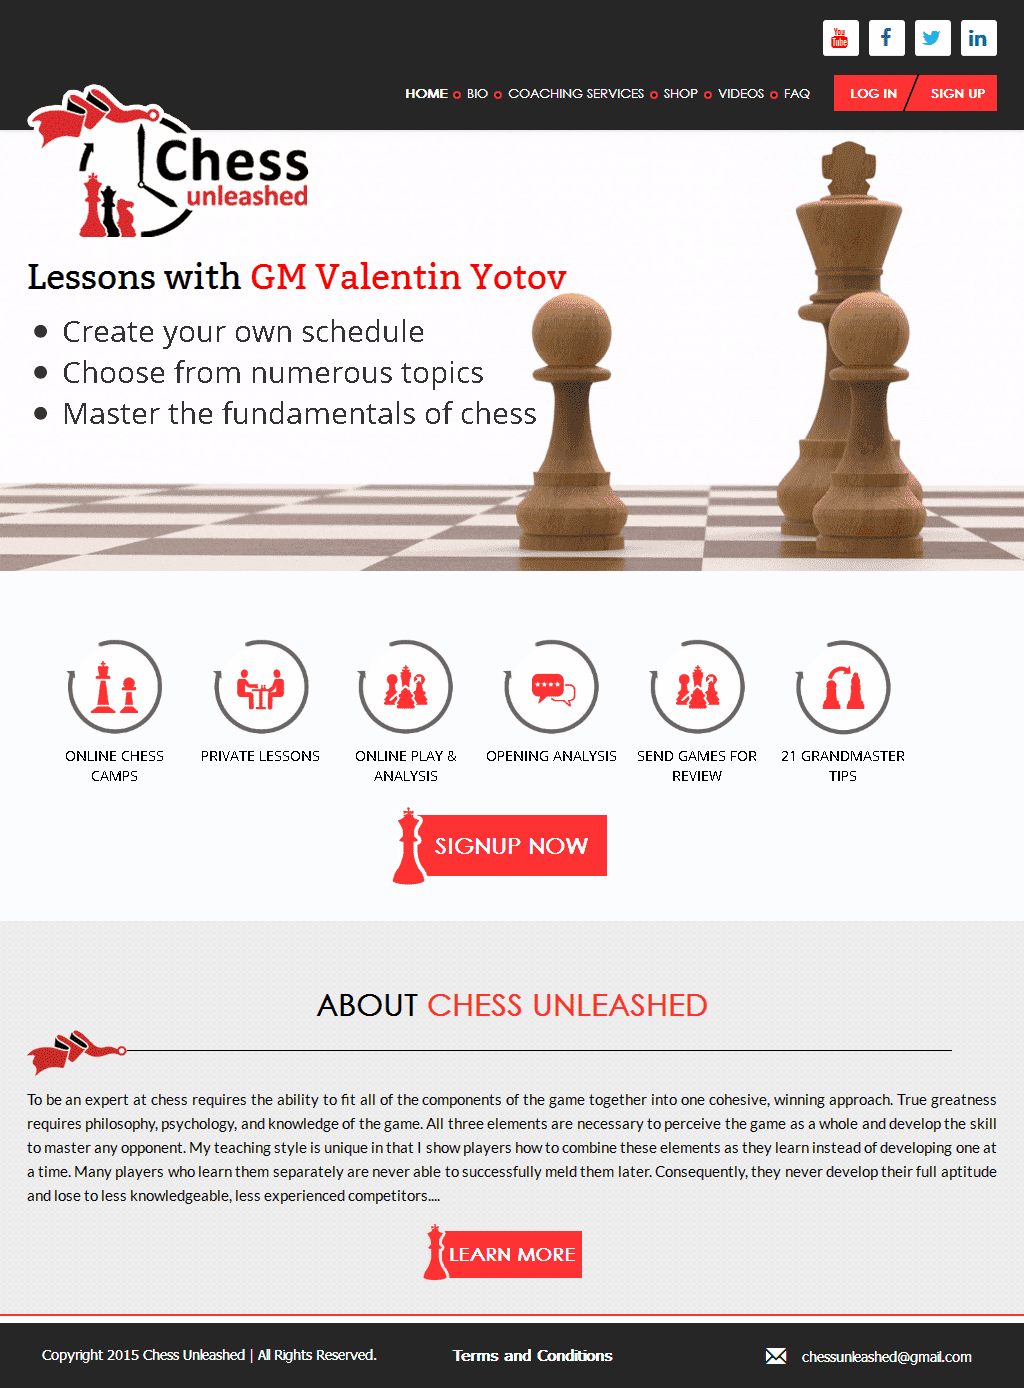 Case Study of www.chessunleashed.us